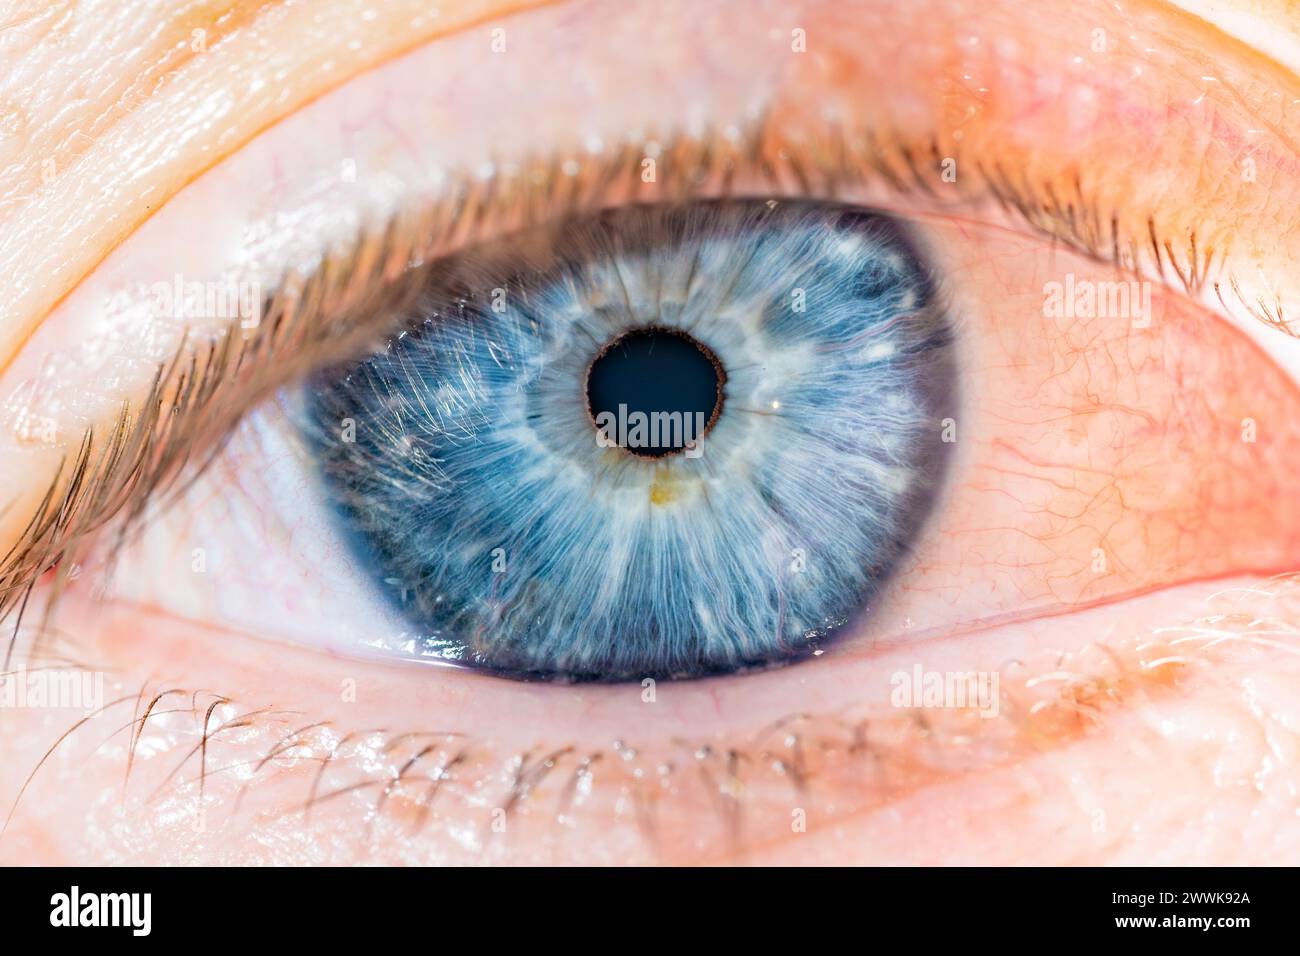 Description: Male Blue Colored Eye With Long Lashes Close Up. Structural Anatomy. Human Iris Super Macro Detail. Stock Photo